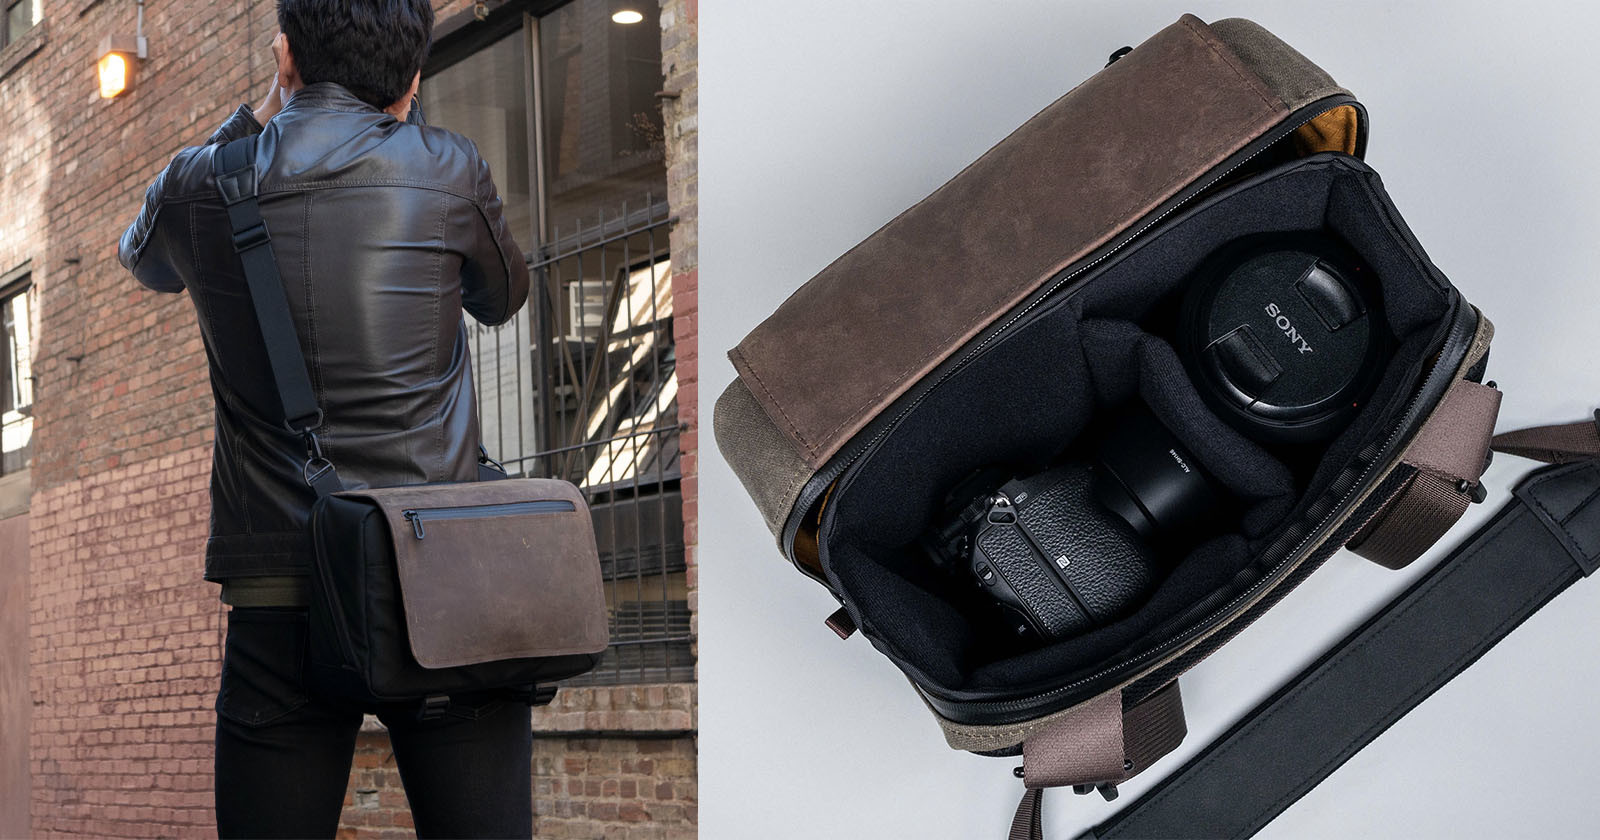 The WaterField Designs Cargo Camera Bag is a Compact Sling for the City